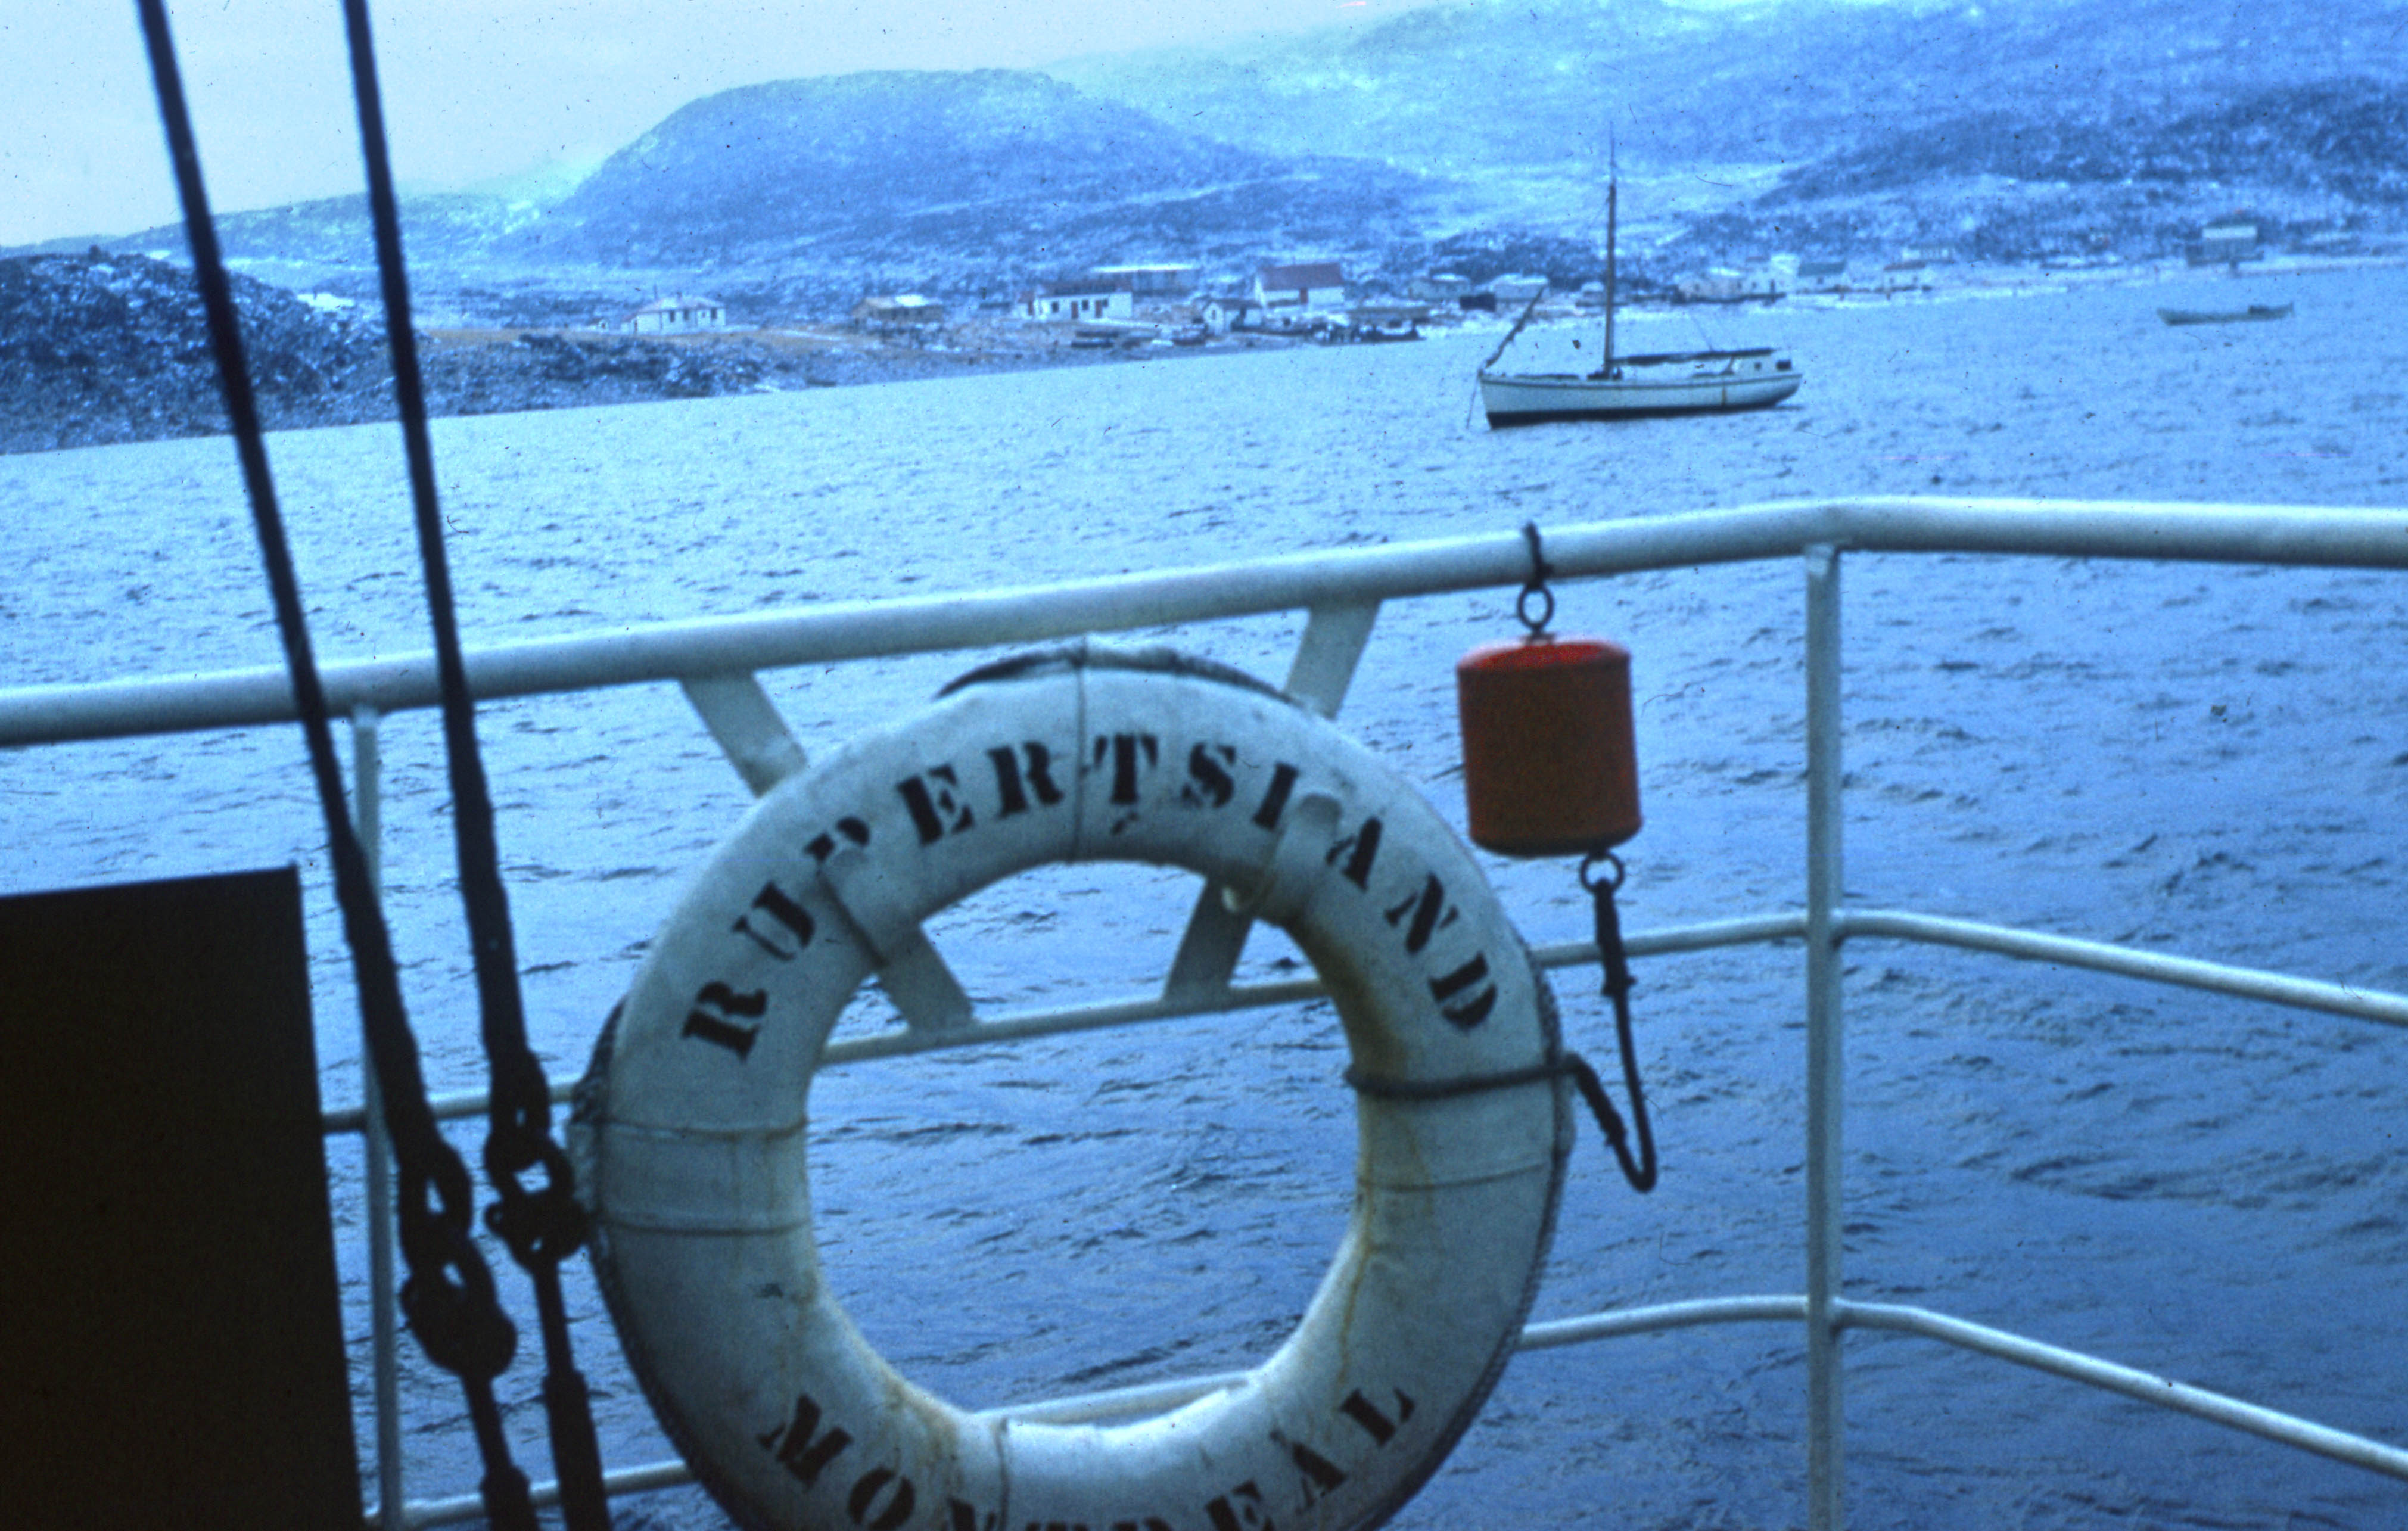 Photograph of Cape Dorset taken from the Rupertsland, 1960